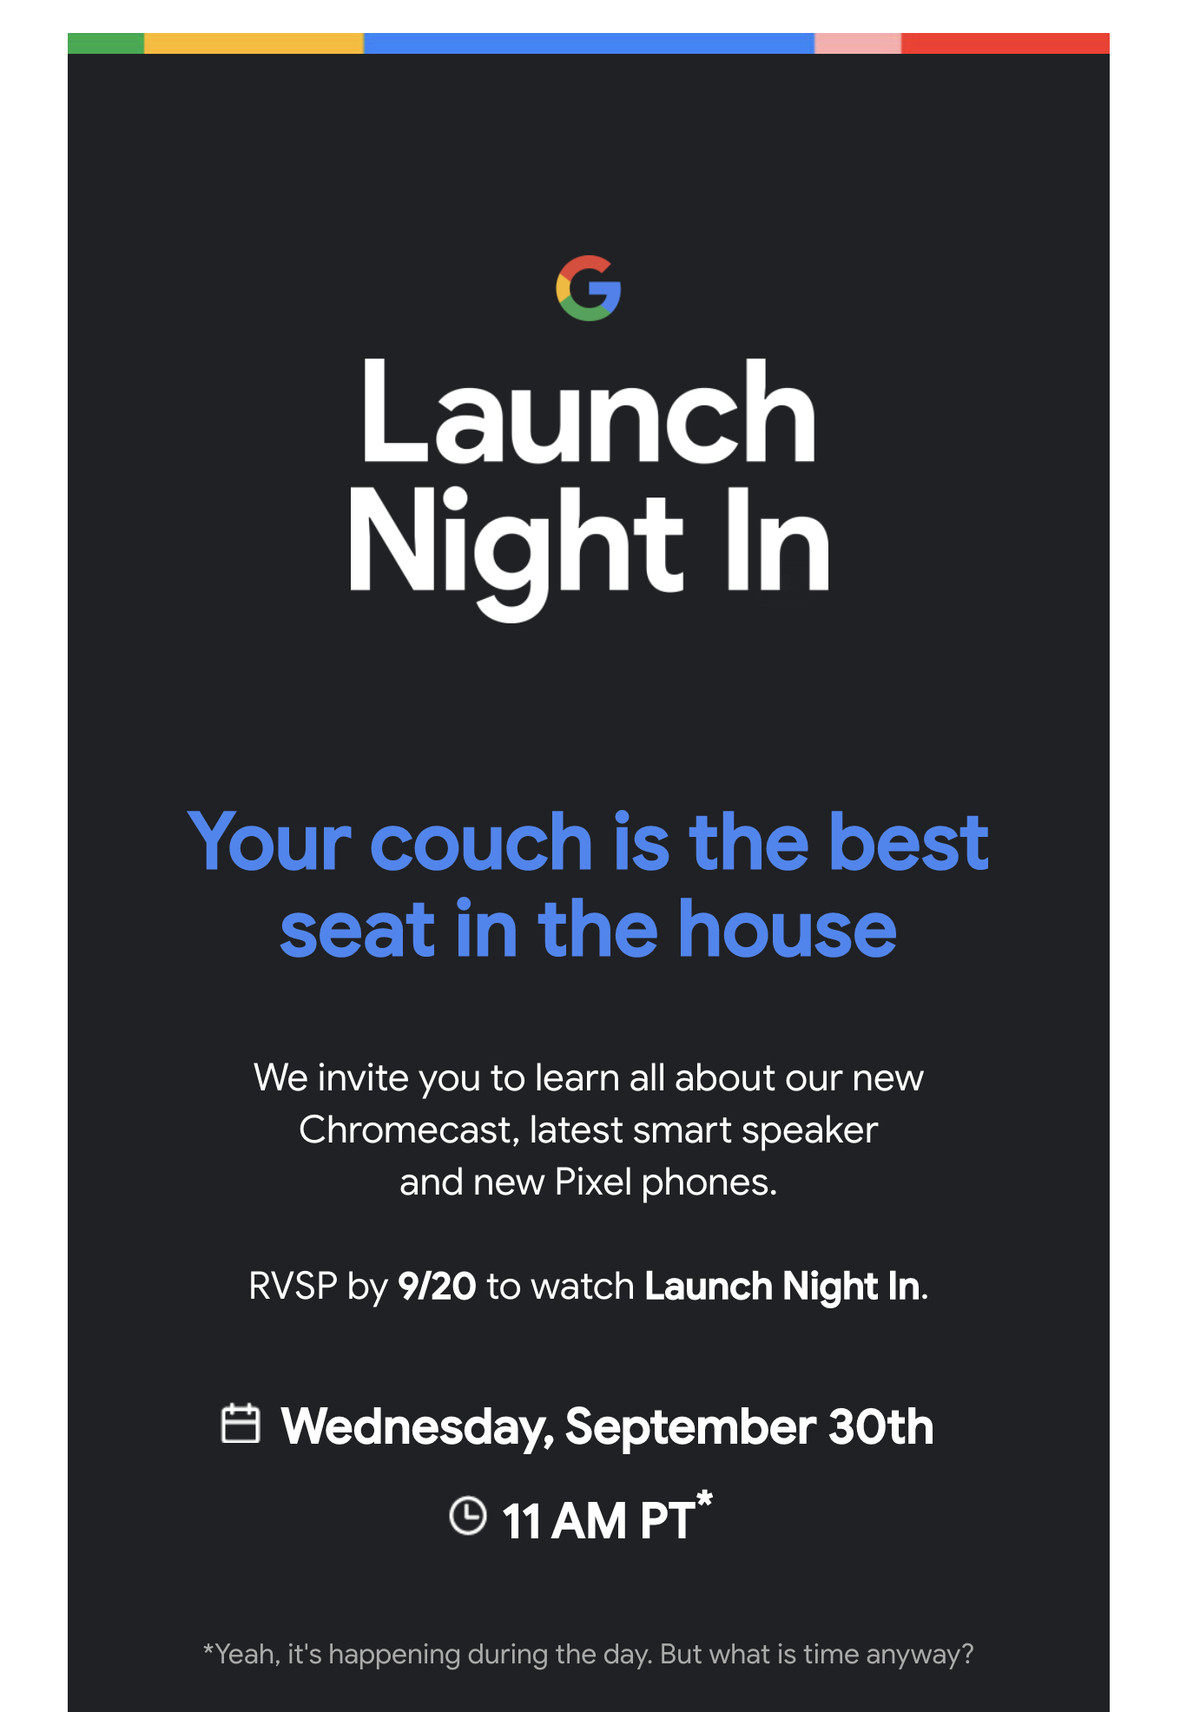 Google To Launch Pixel 5 New Chromecast And Smart Speaker On September 30th Wilson S Media - new water moves avatar the four nations roblox